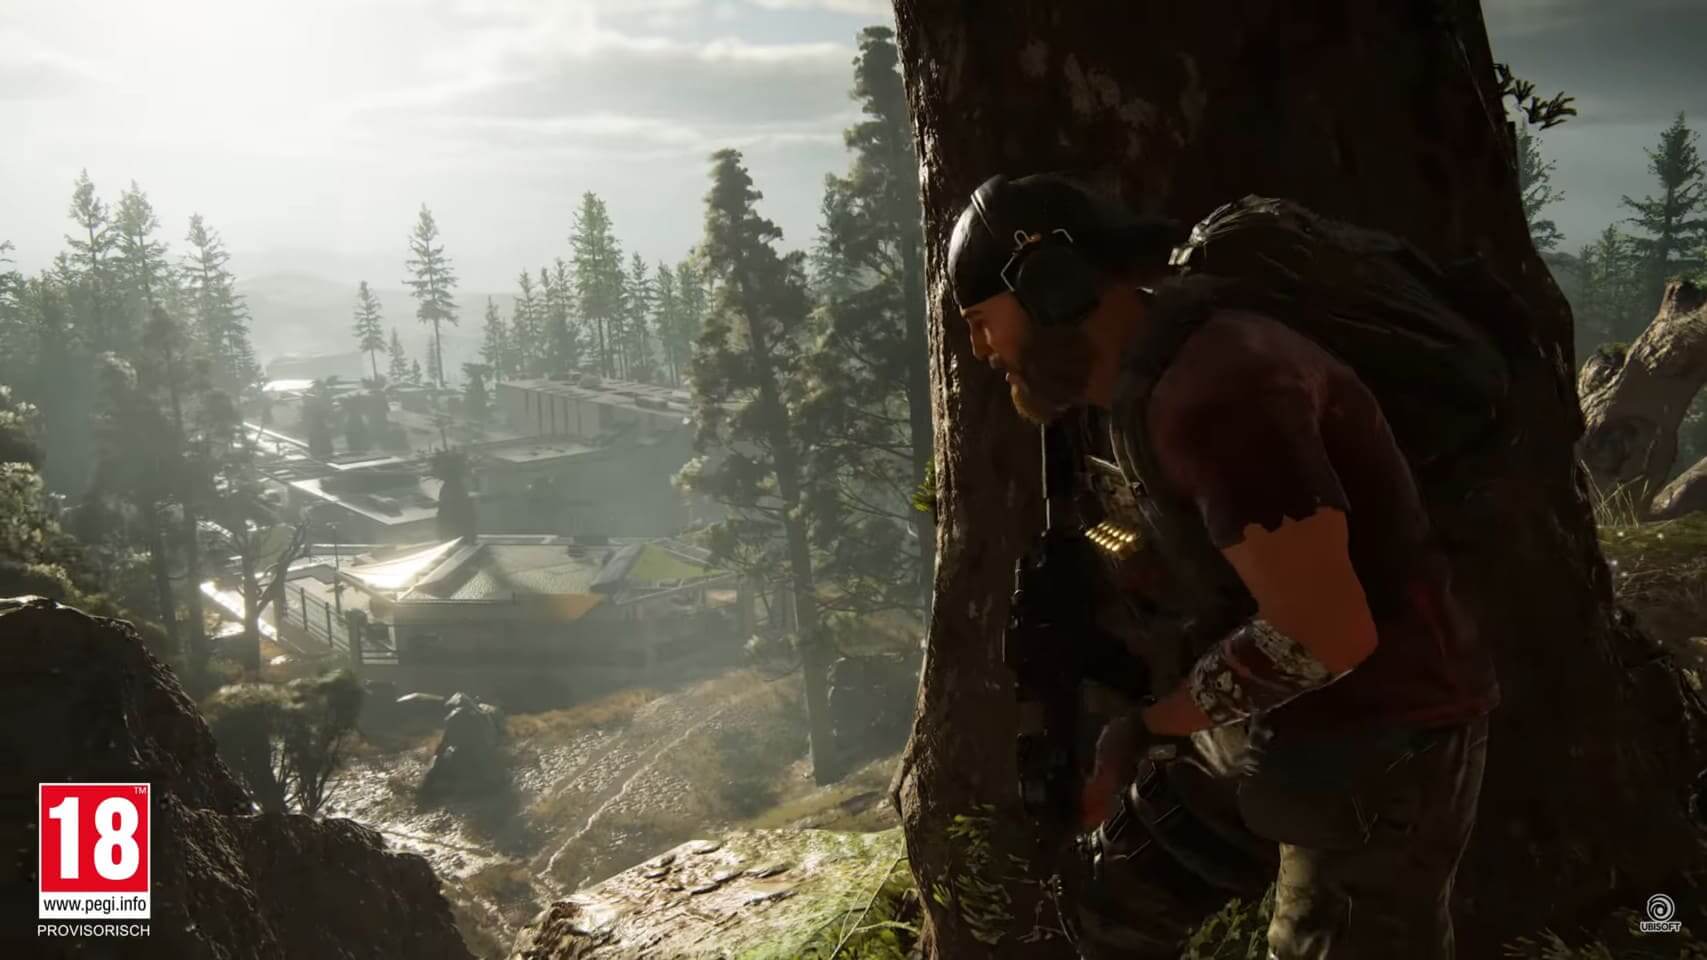 NP: Ghost Recon Breakpoint trailer gameplay